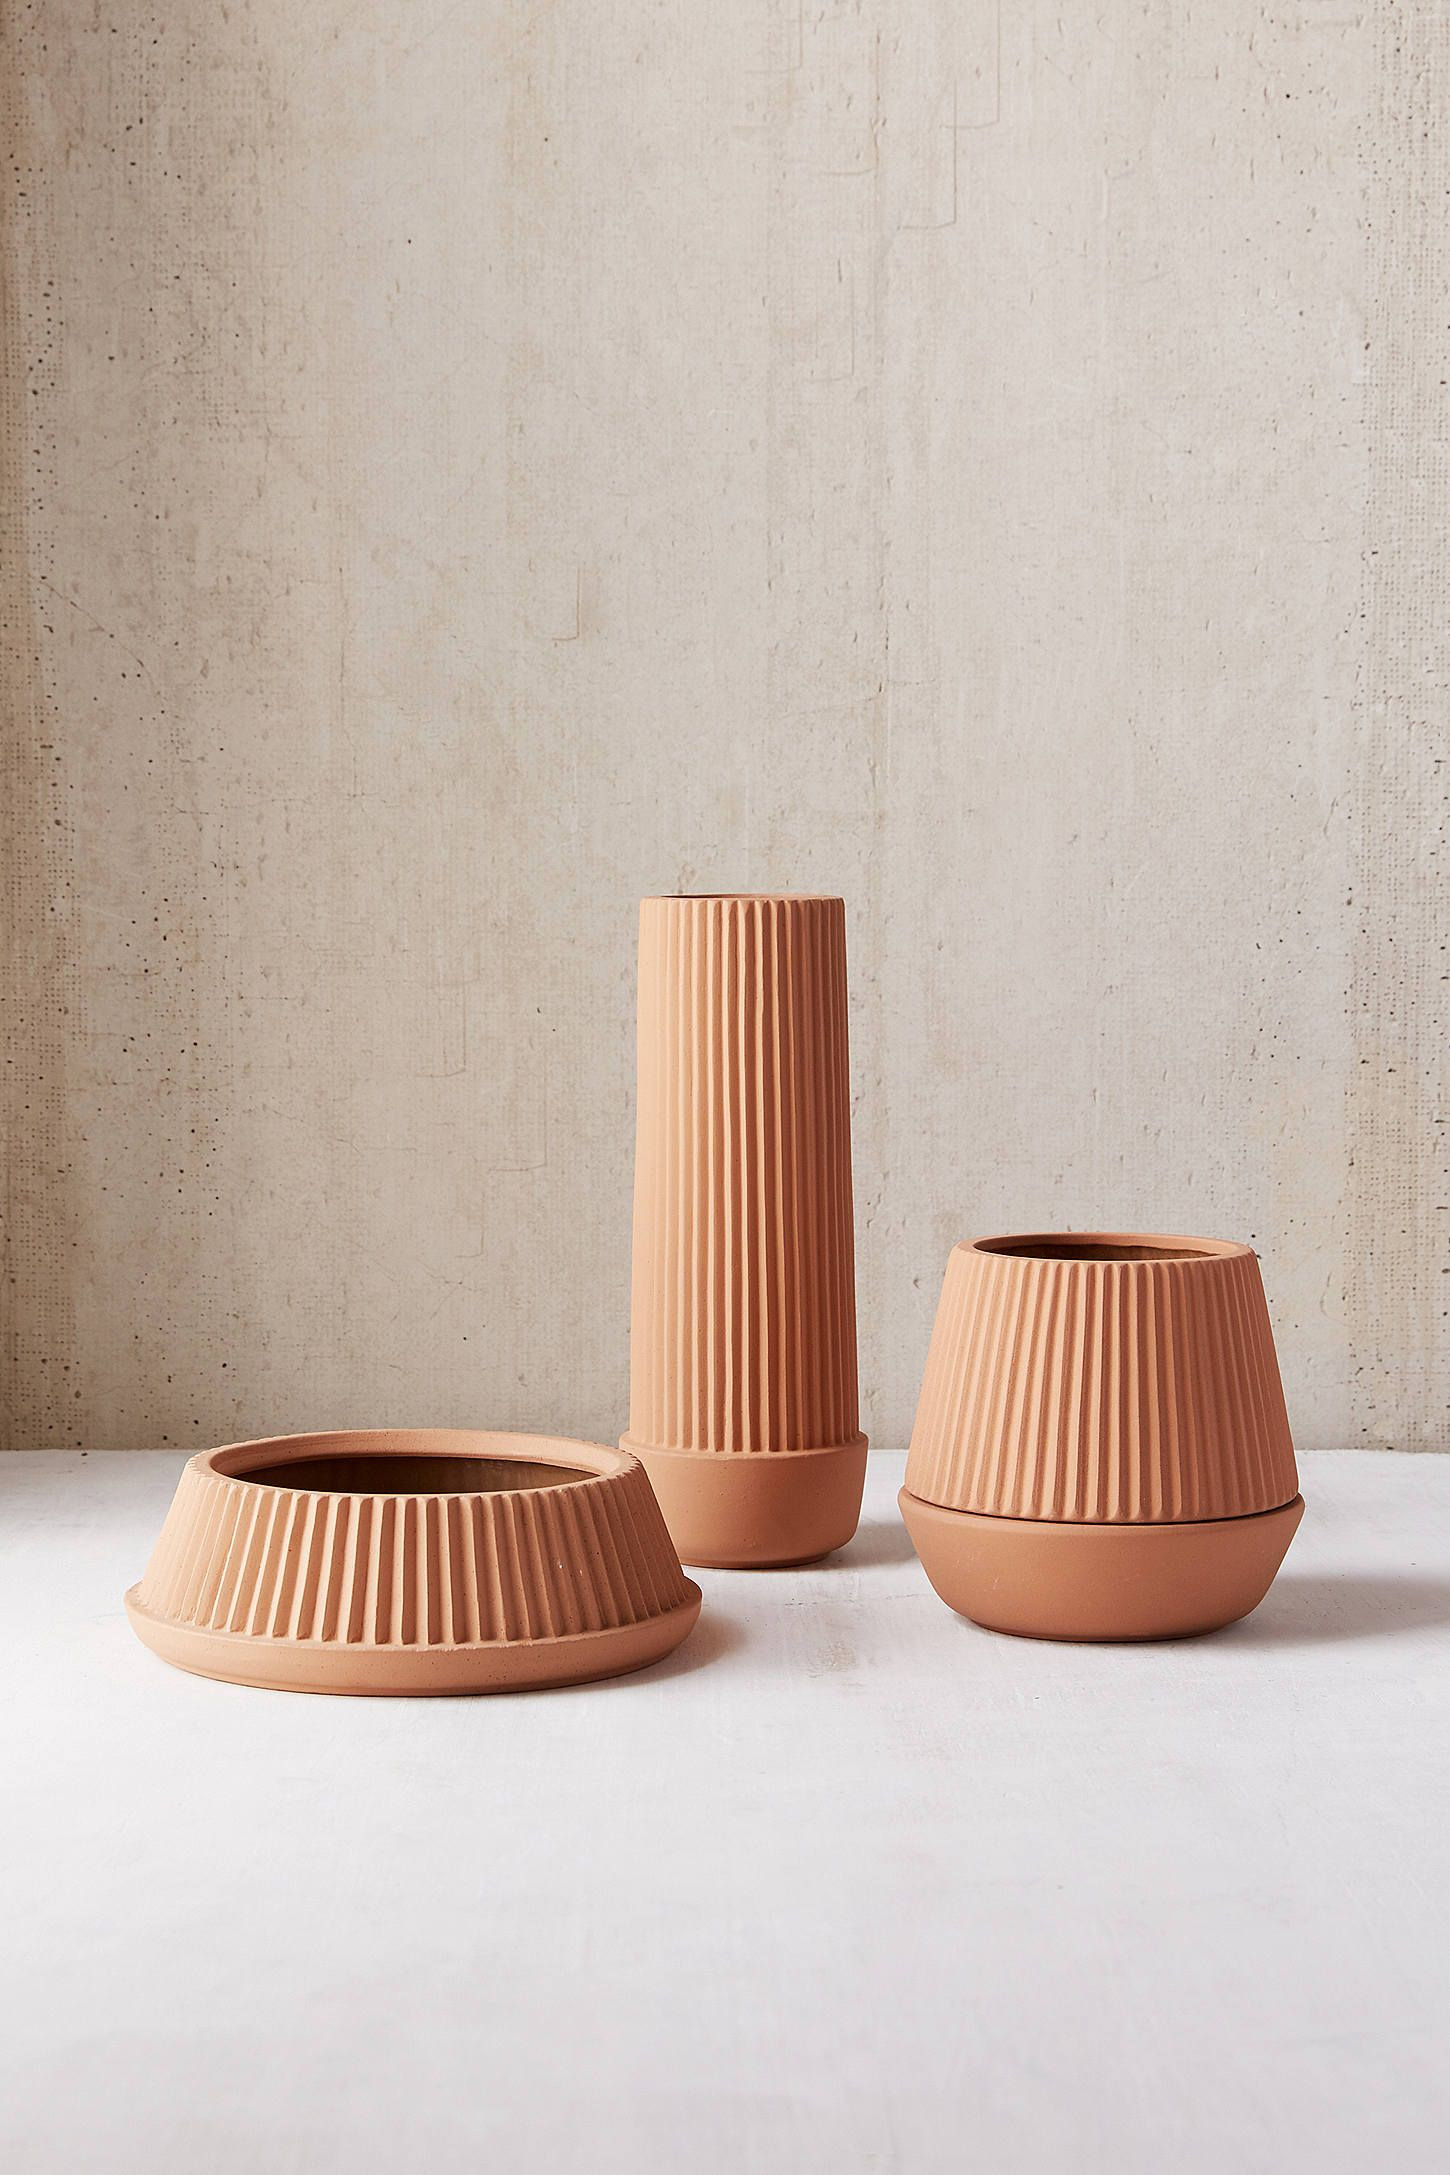 ceramic vase set of 3 of umbra shift pleated planter drainage tray set in 2018 c within slide view 3 umbra shift pleated planter drainage tray set